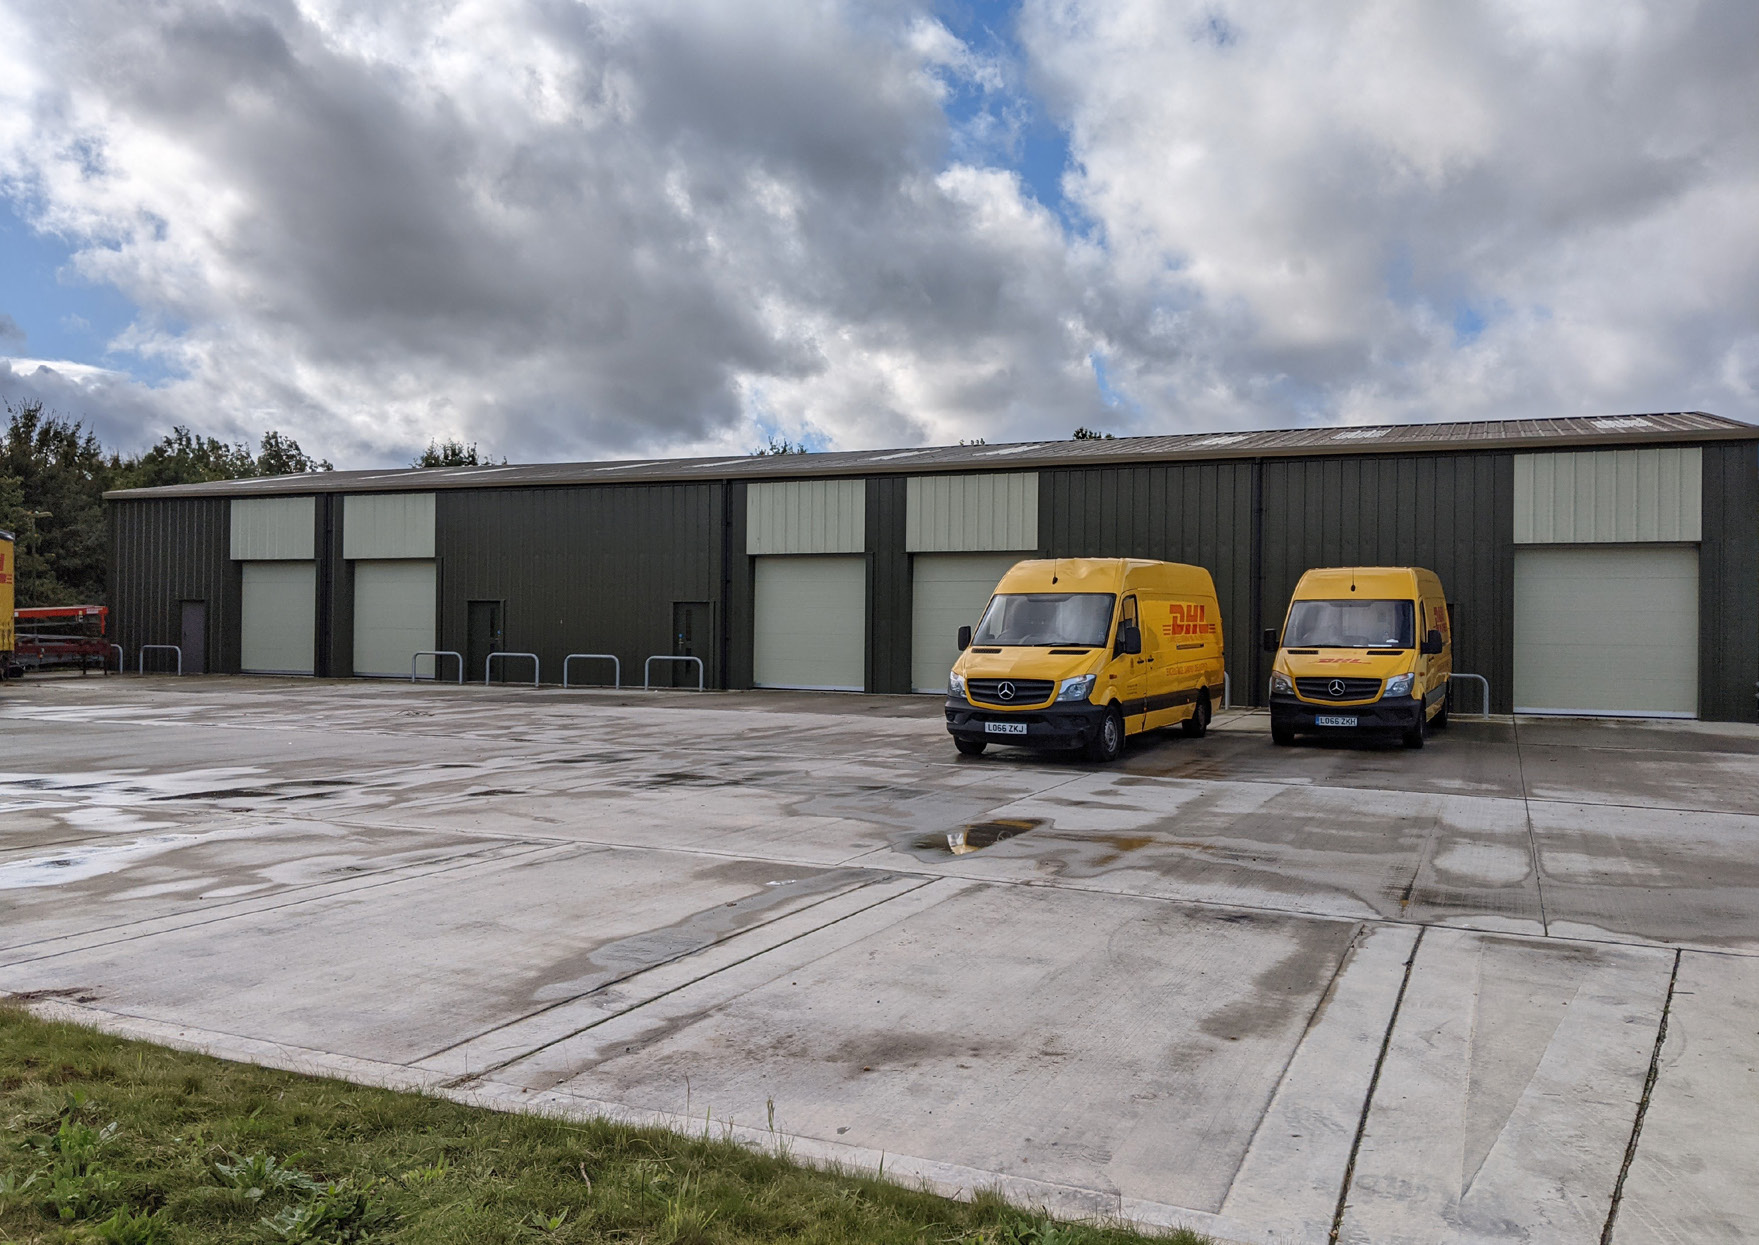 Investment sale of a newly developed terrace of 5 industrial units let to DHL